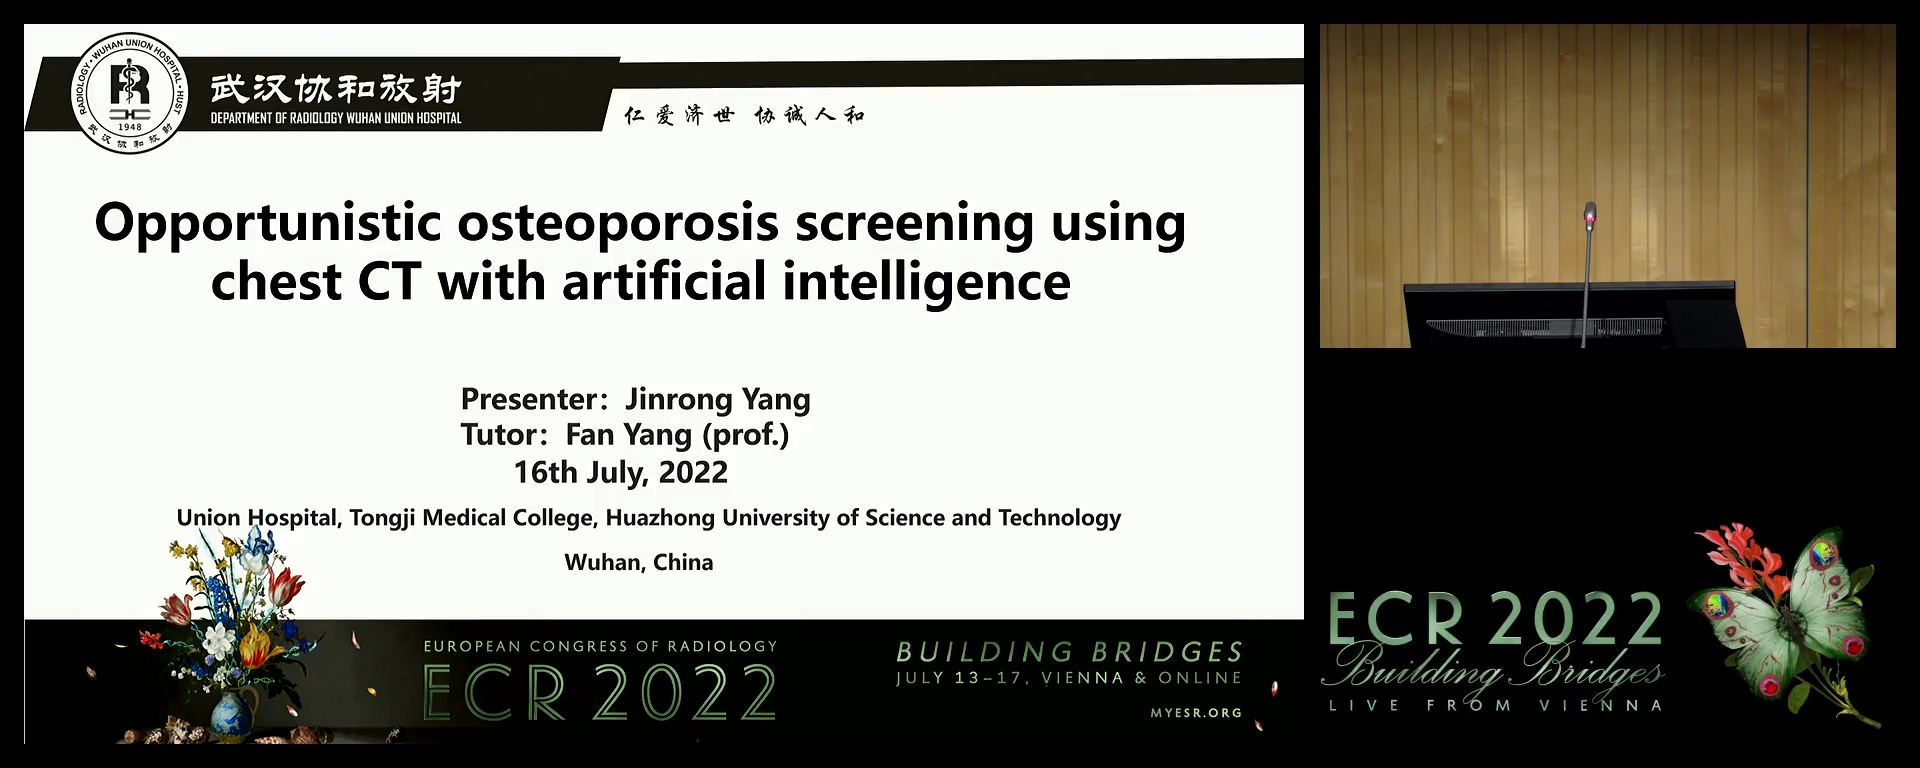 Opportunistic osteoporosis screening using chest CT with artificial intelligence - Jinrong Yang, Wuhan / CN